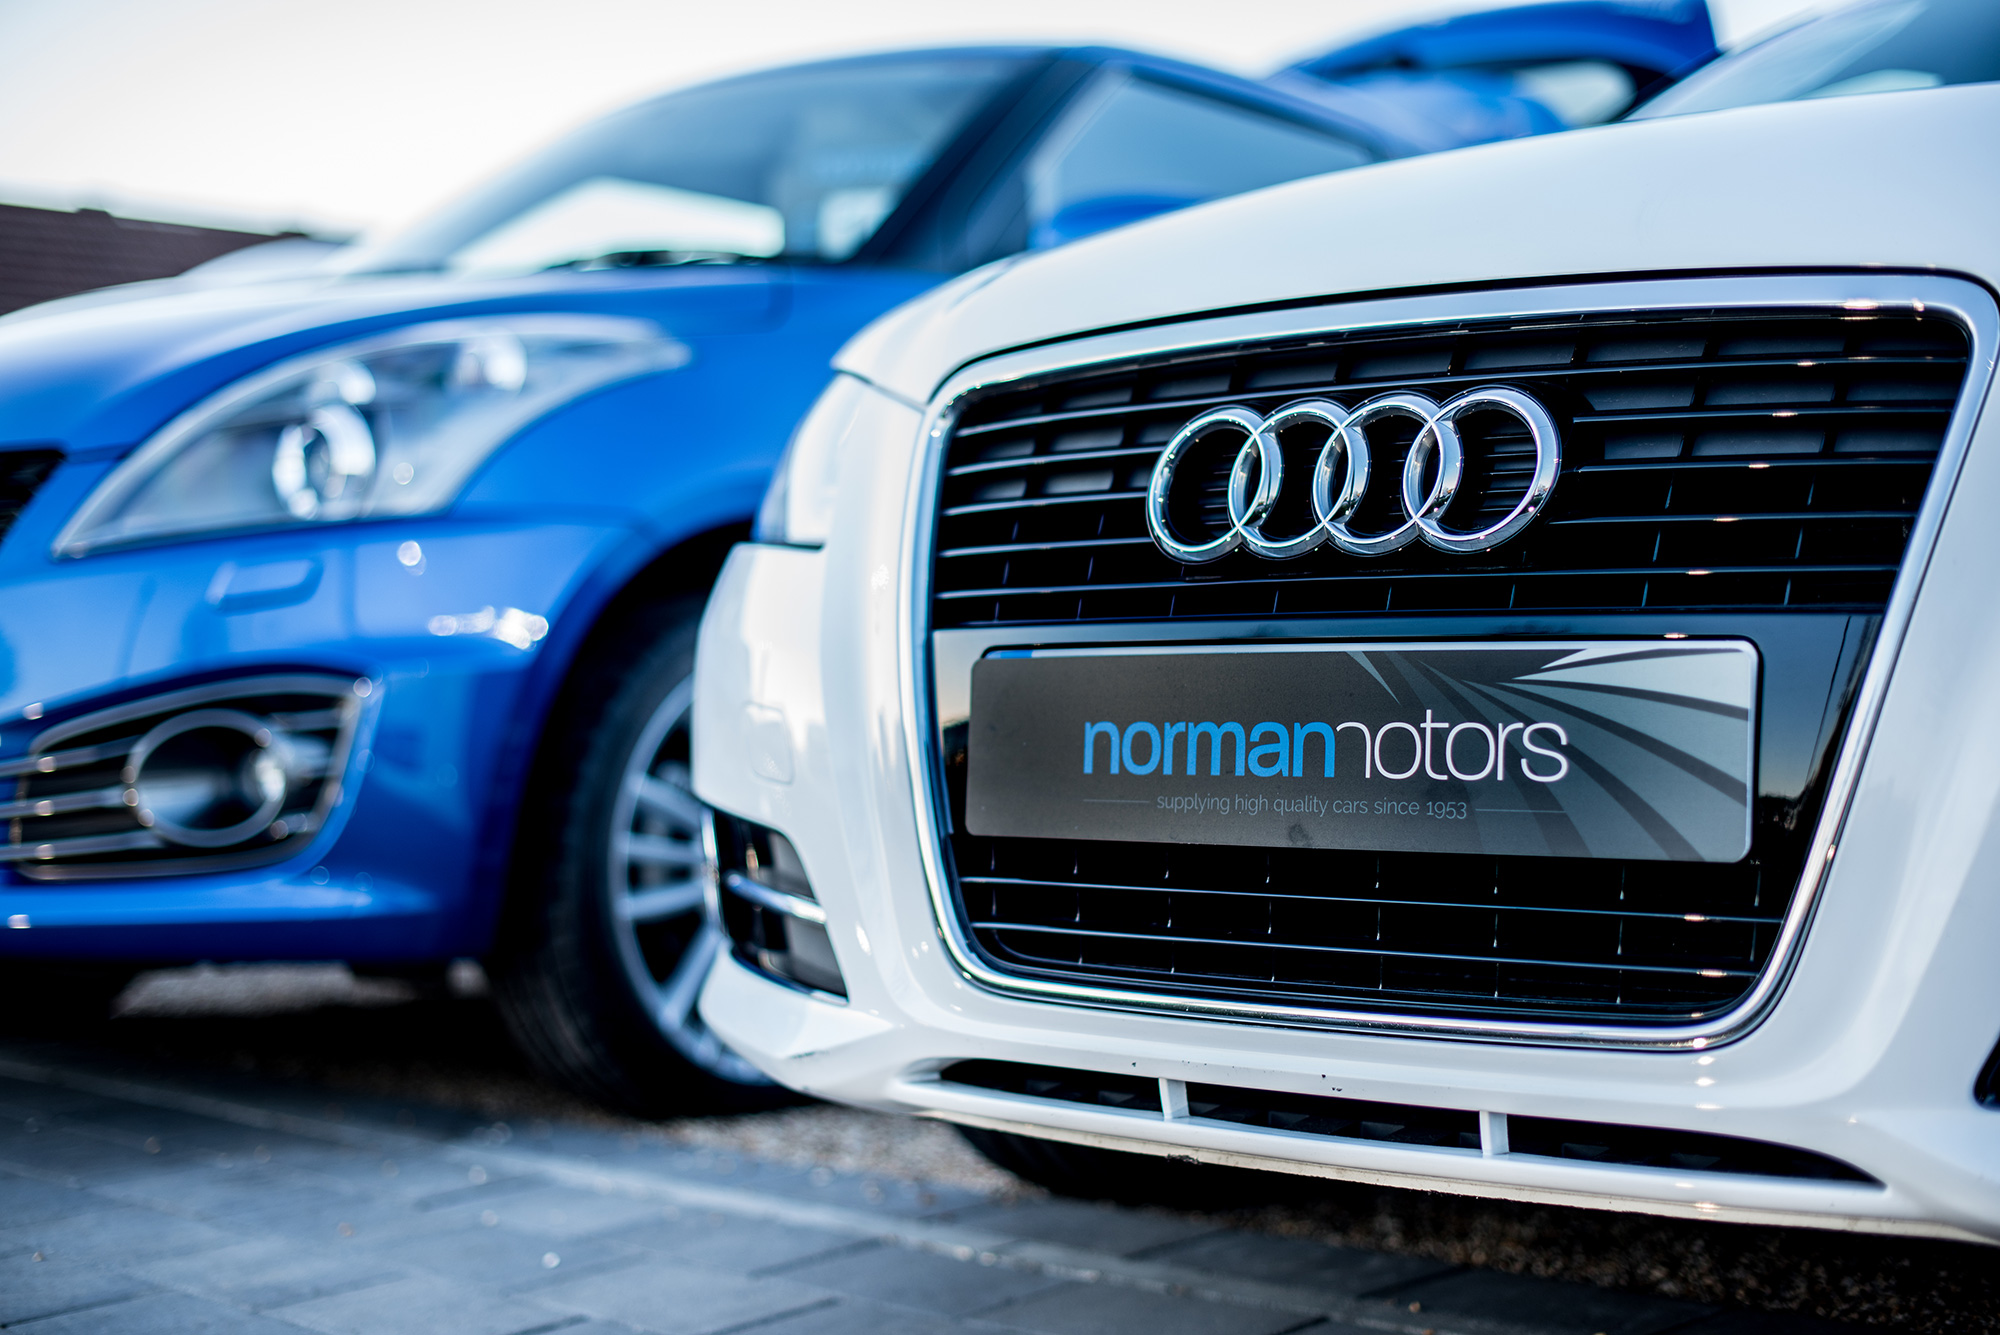 Norman-Motors-Commerical-Photography-Bournemouth-Car-Garage-1.jpg